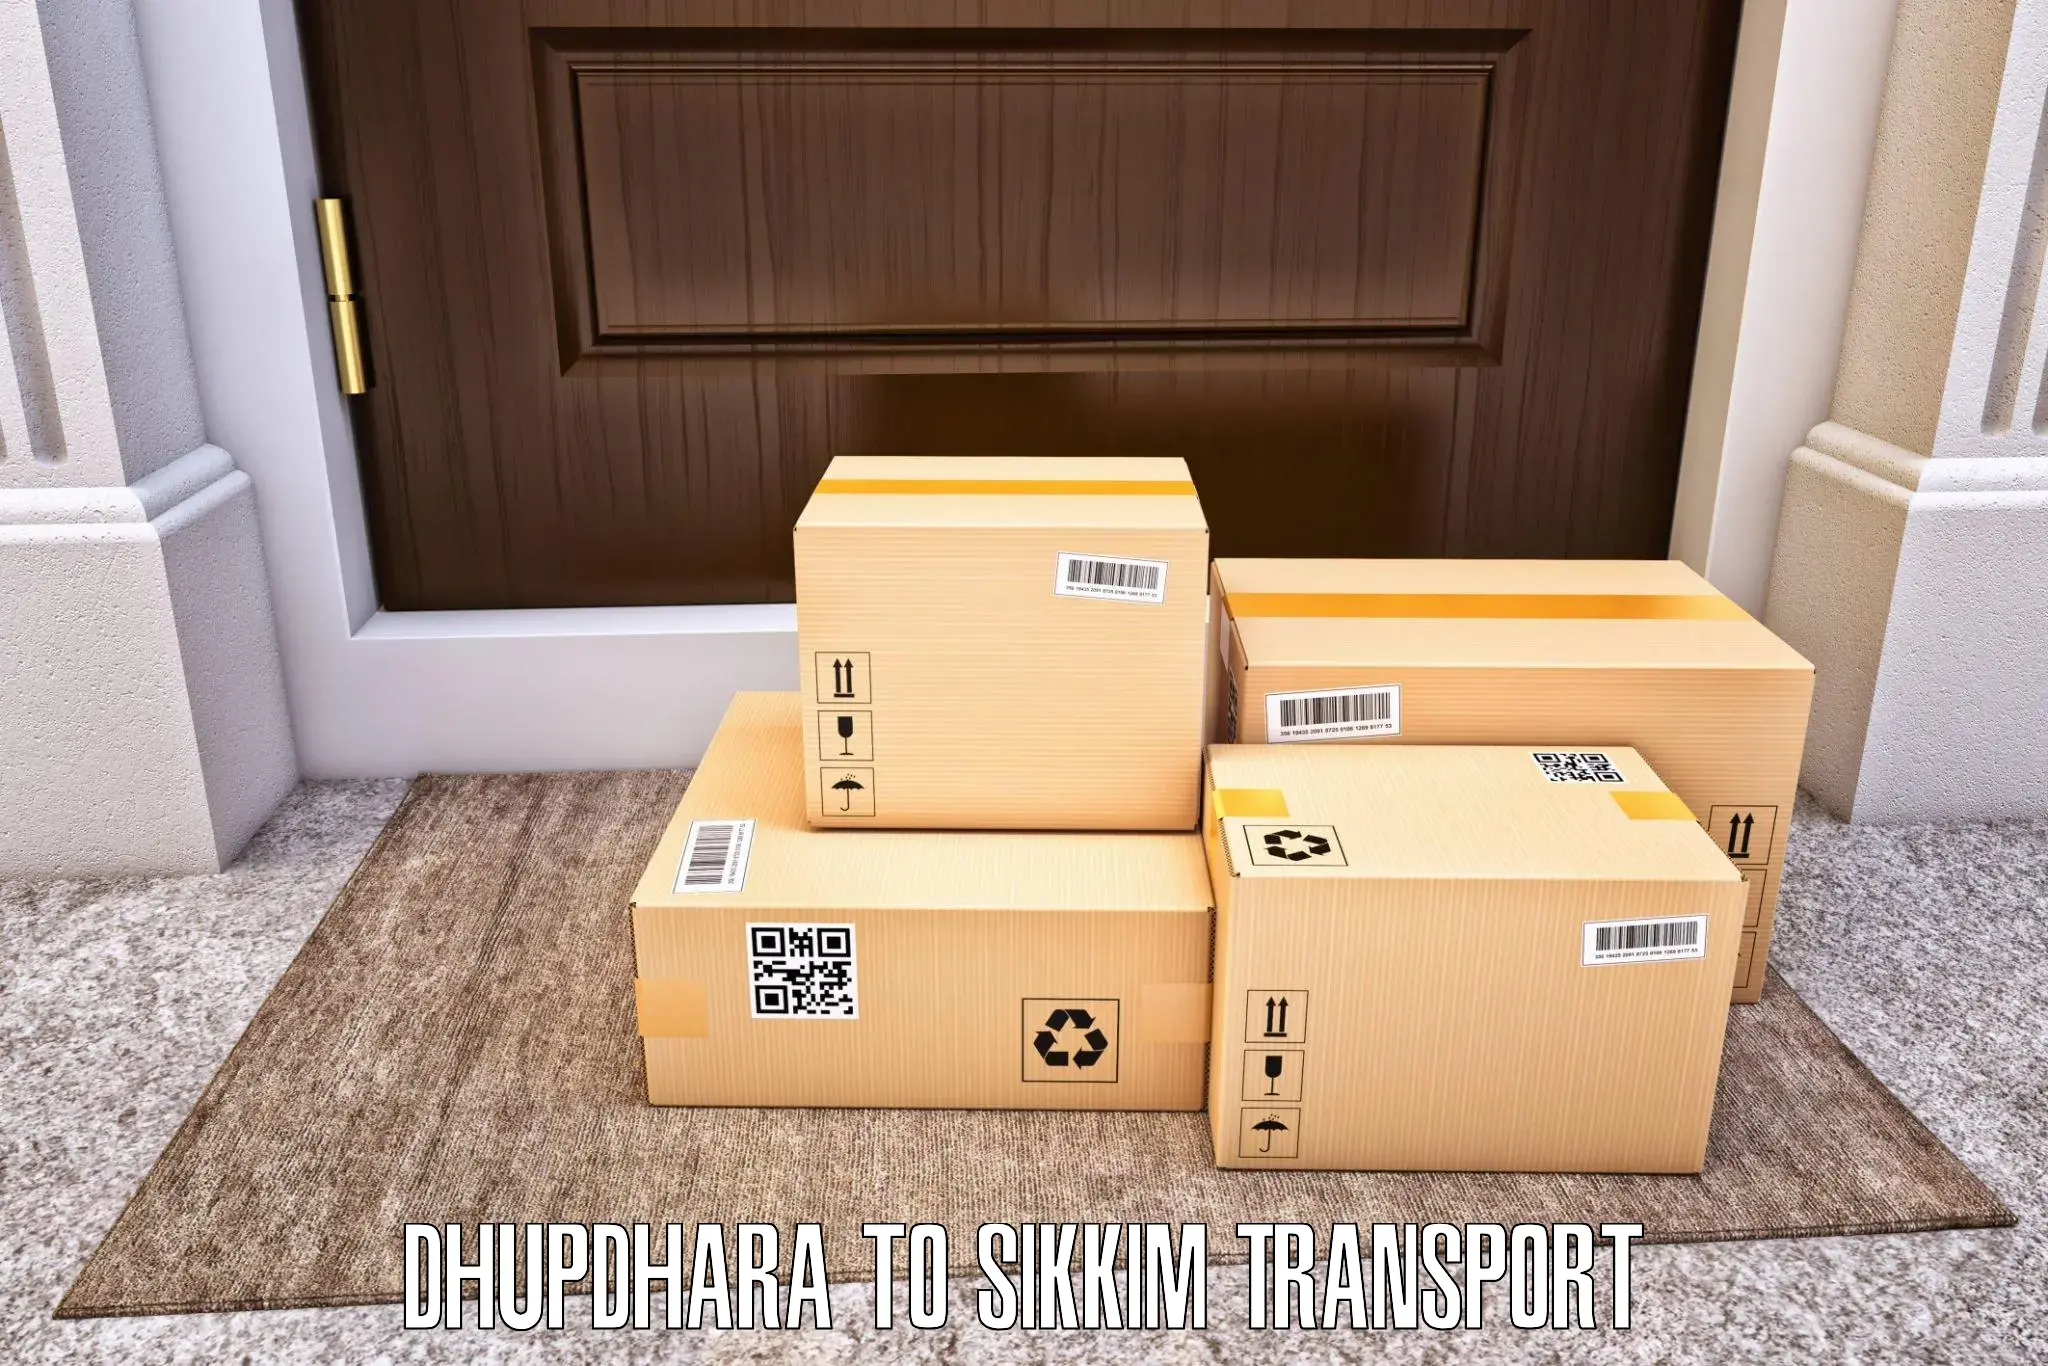 Transportation services in Dhupdhara to Ranipool